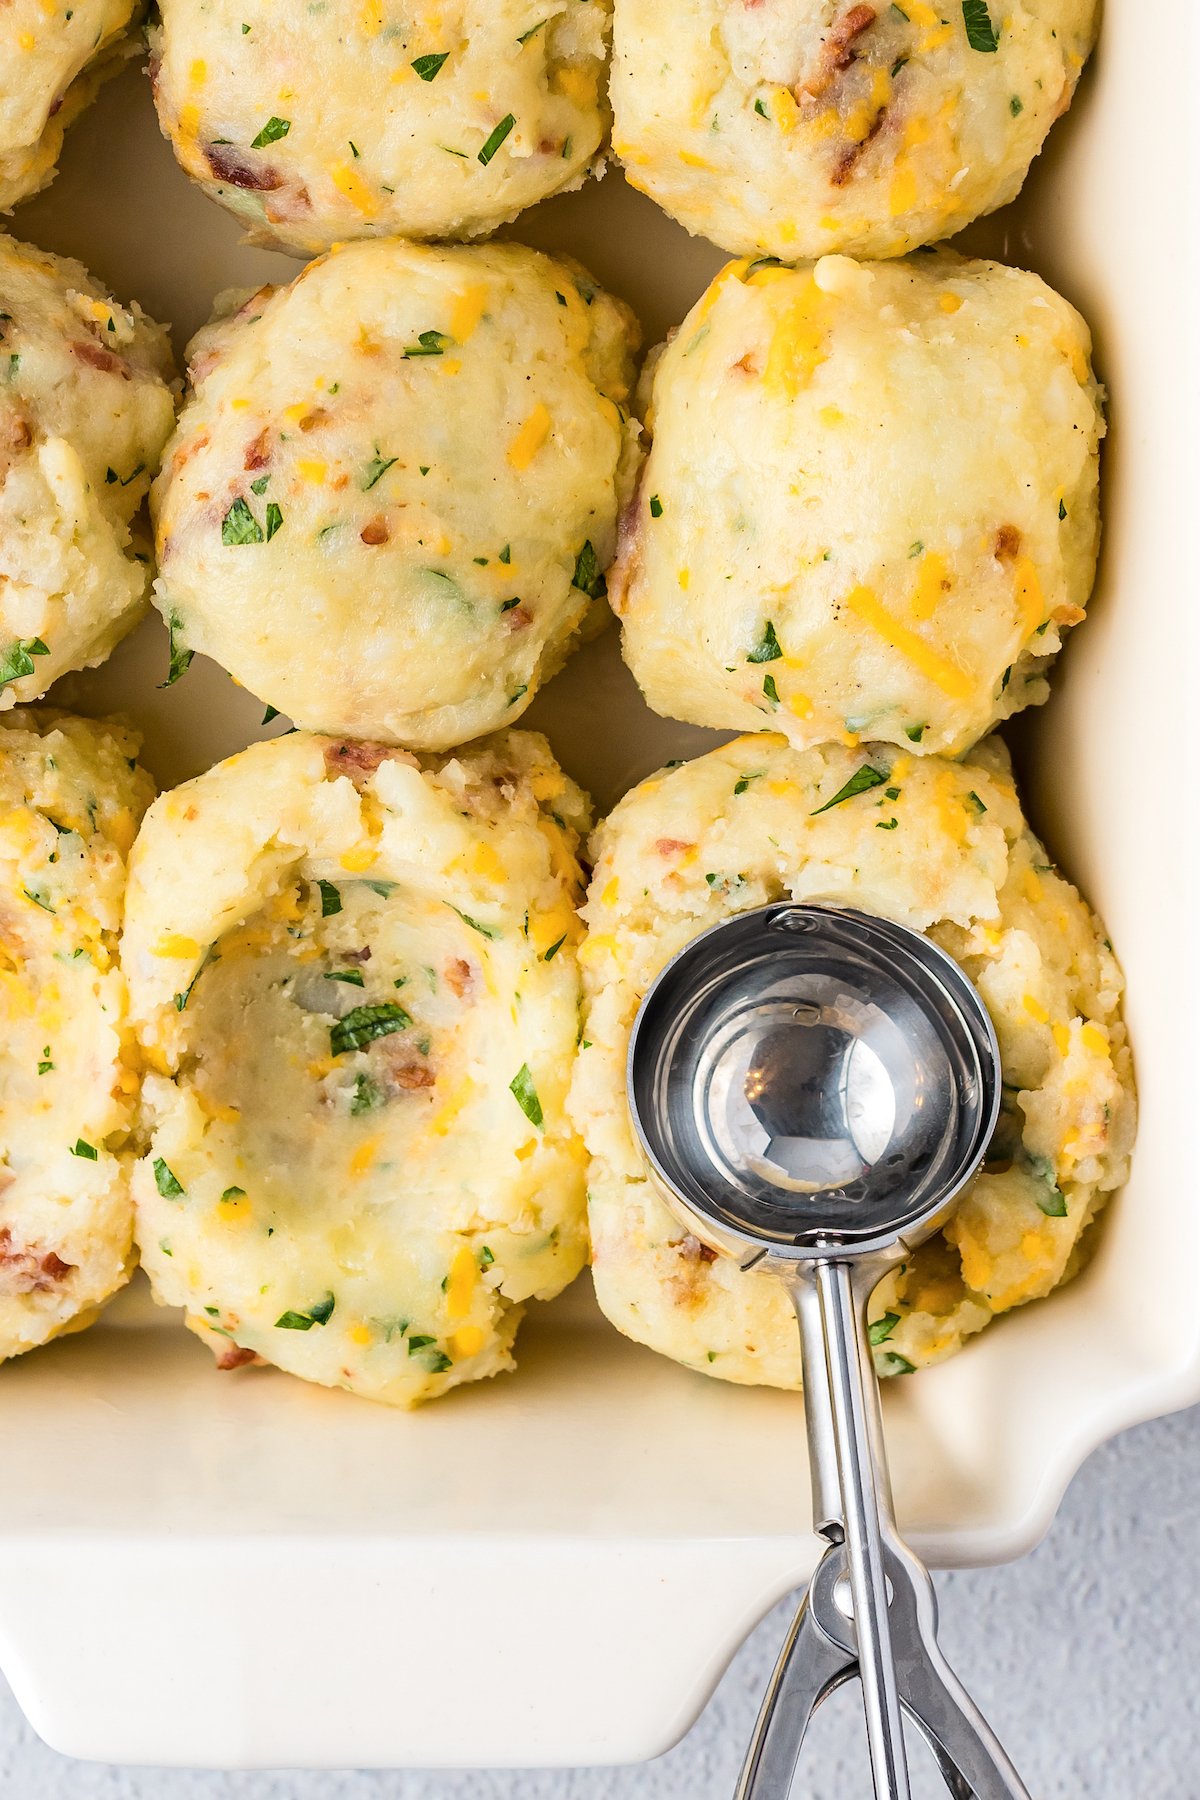 Mounds of mashed potatoes in a casserole dish with a cookie scoop pressing into the potatoes to make an indent.